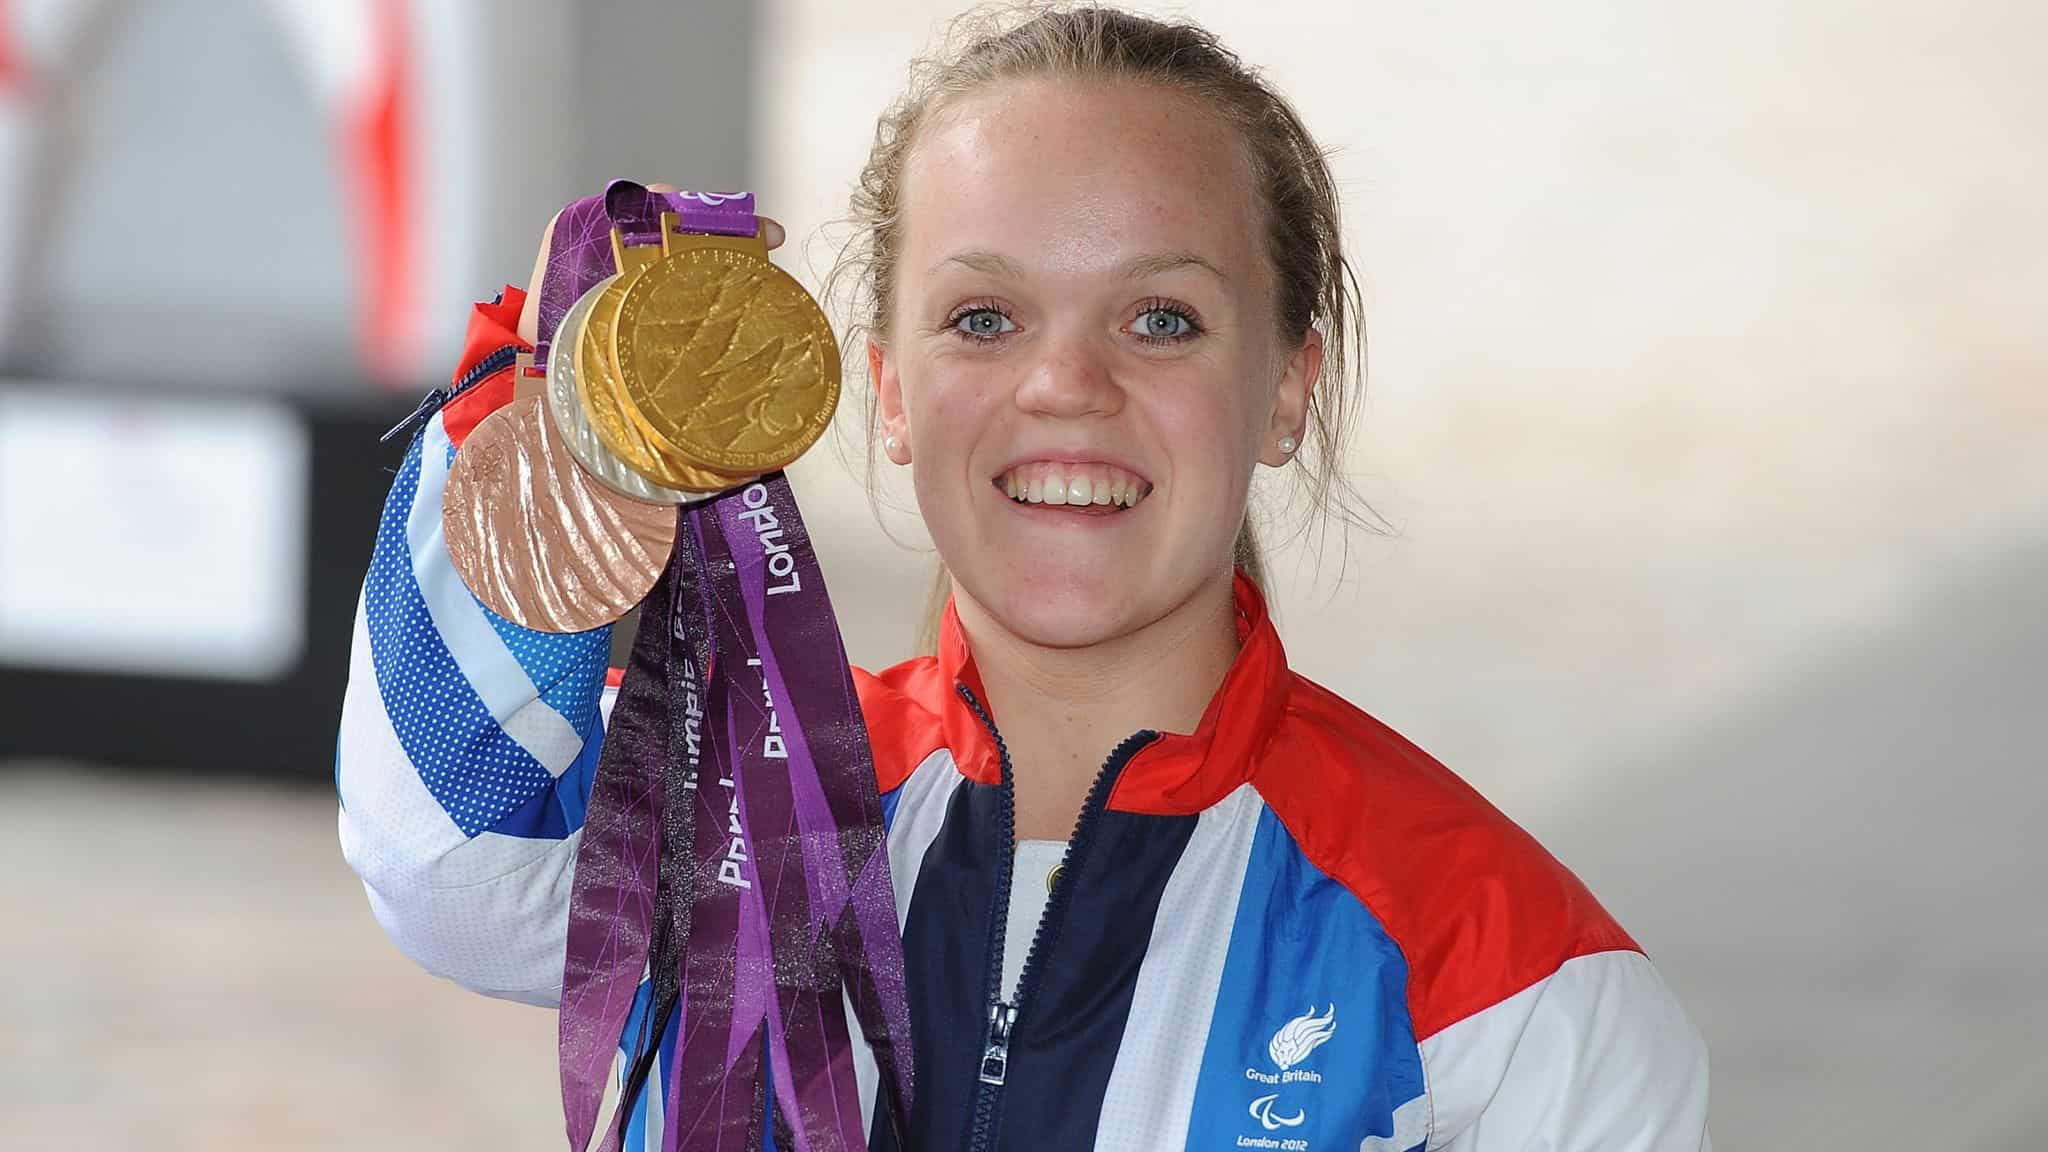 Swimmer Ellie Simmonds at the 2012 Summer Paralympics held in London (Credits: BBC)